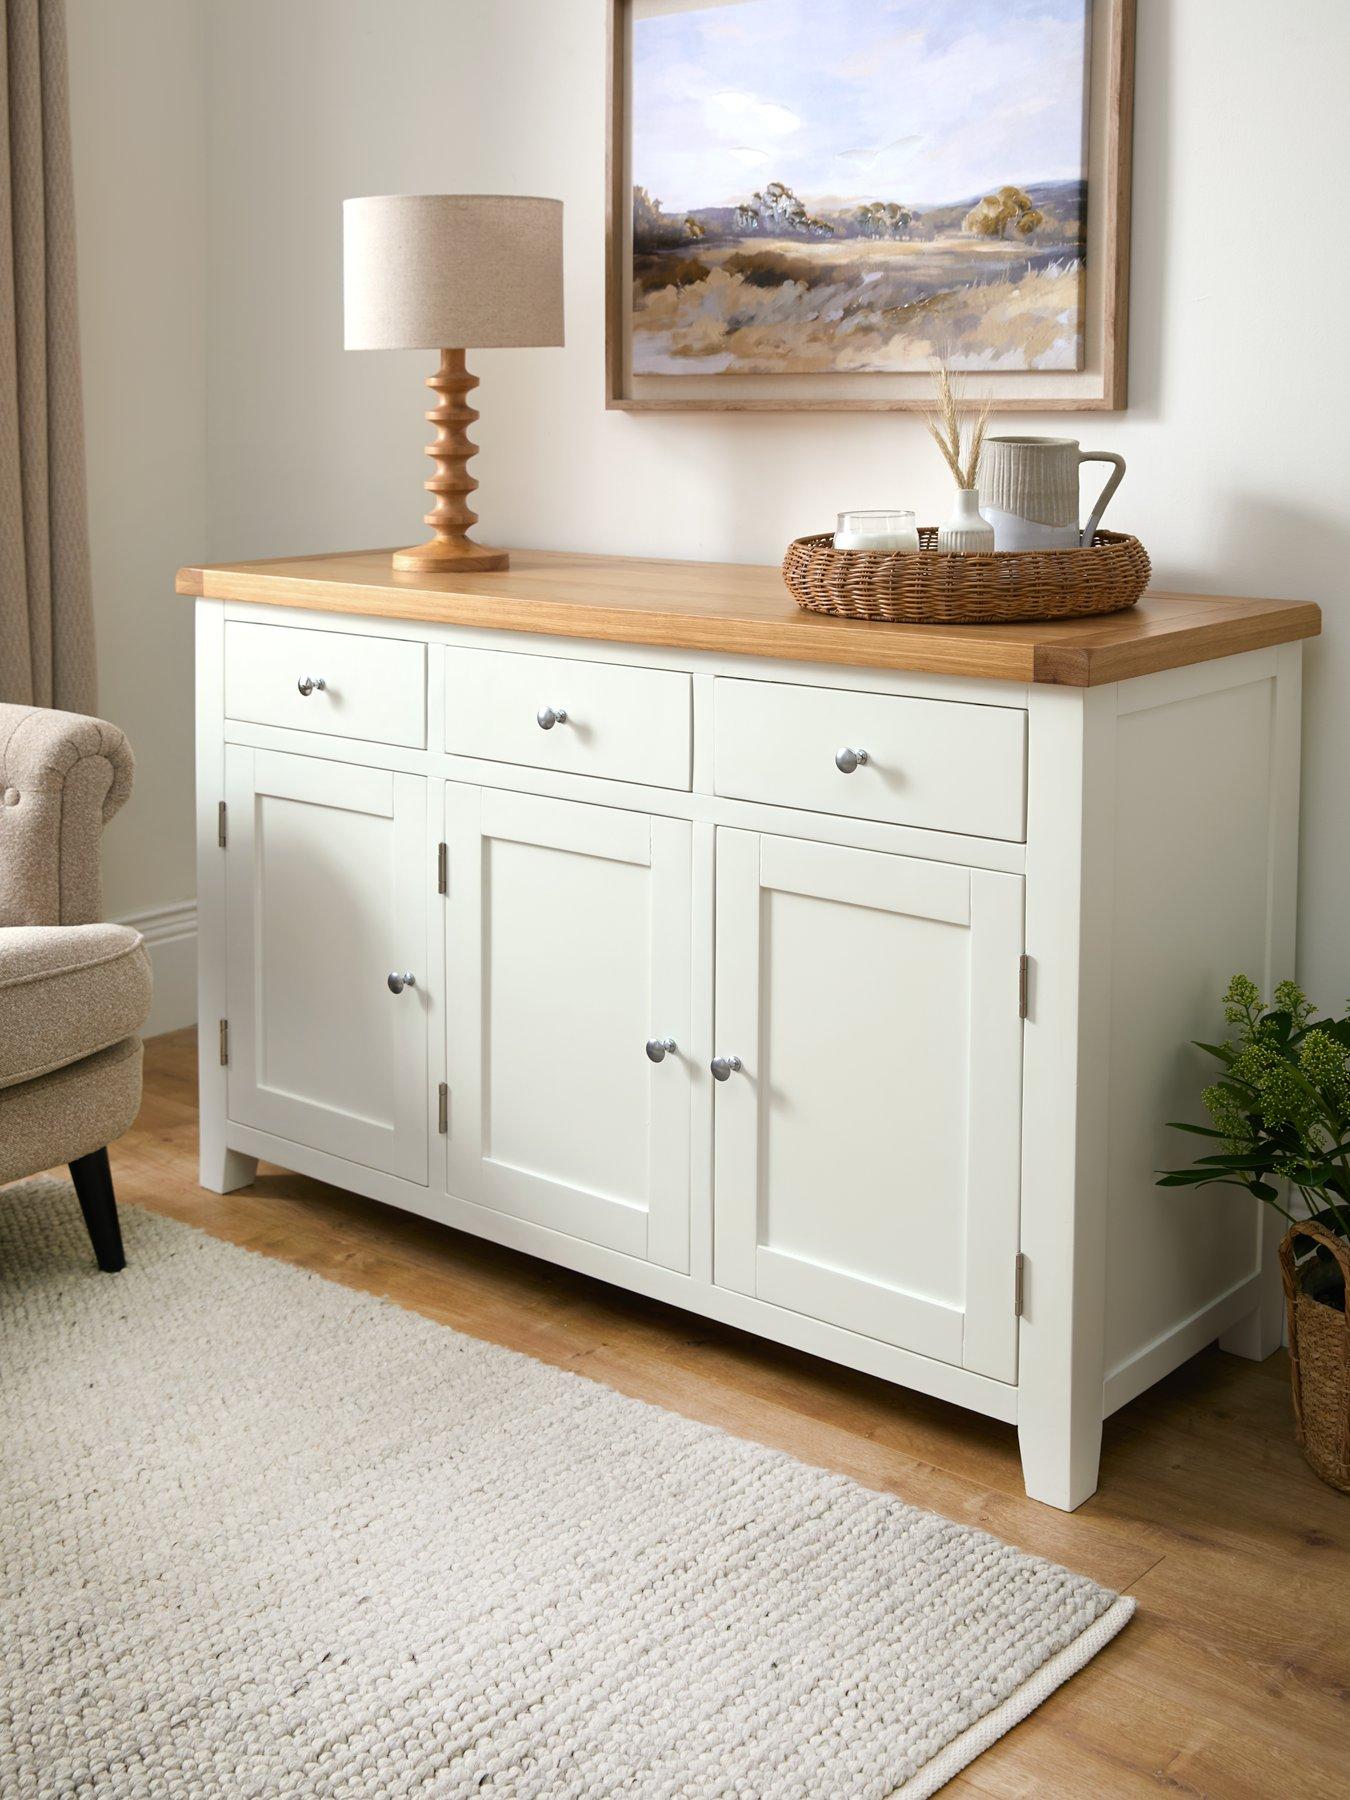 Lancaster Wheeled Sideboard for Outdoor Storage and Serving Space ›  Anything Grows